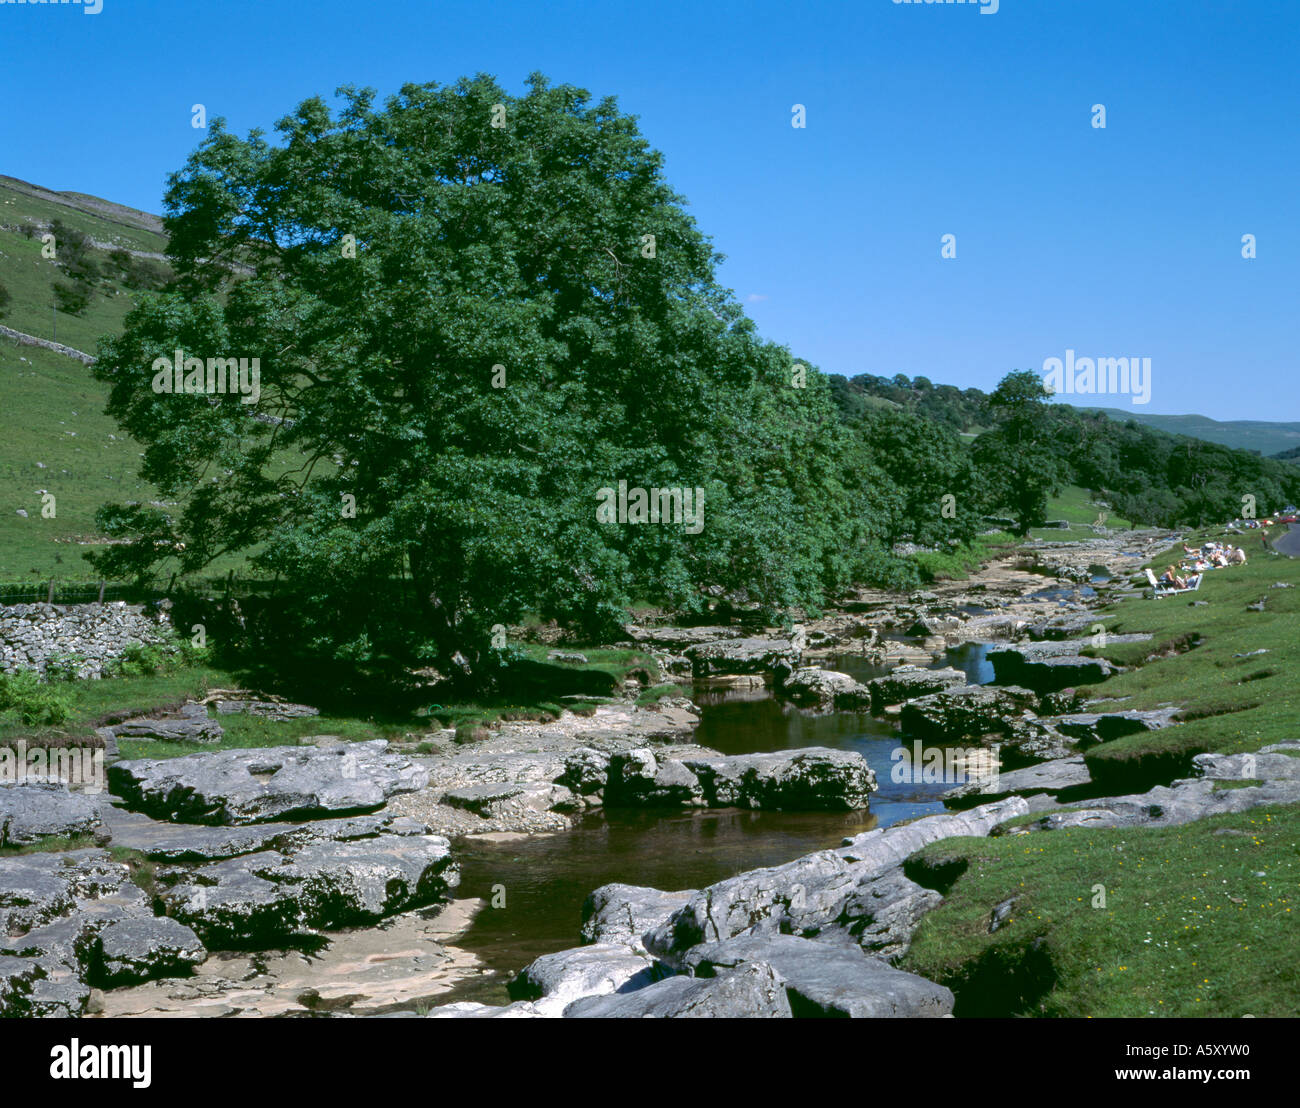 Eroded bed of River Wharfe in limestone rock, Langstrothdale, Yorkshire Dales National Park, North Yorkshire, England, UK. Stock Photo